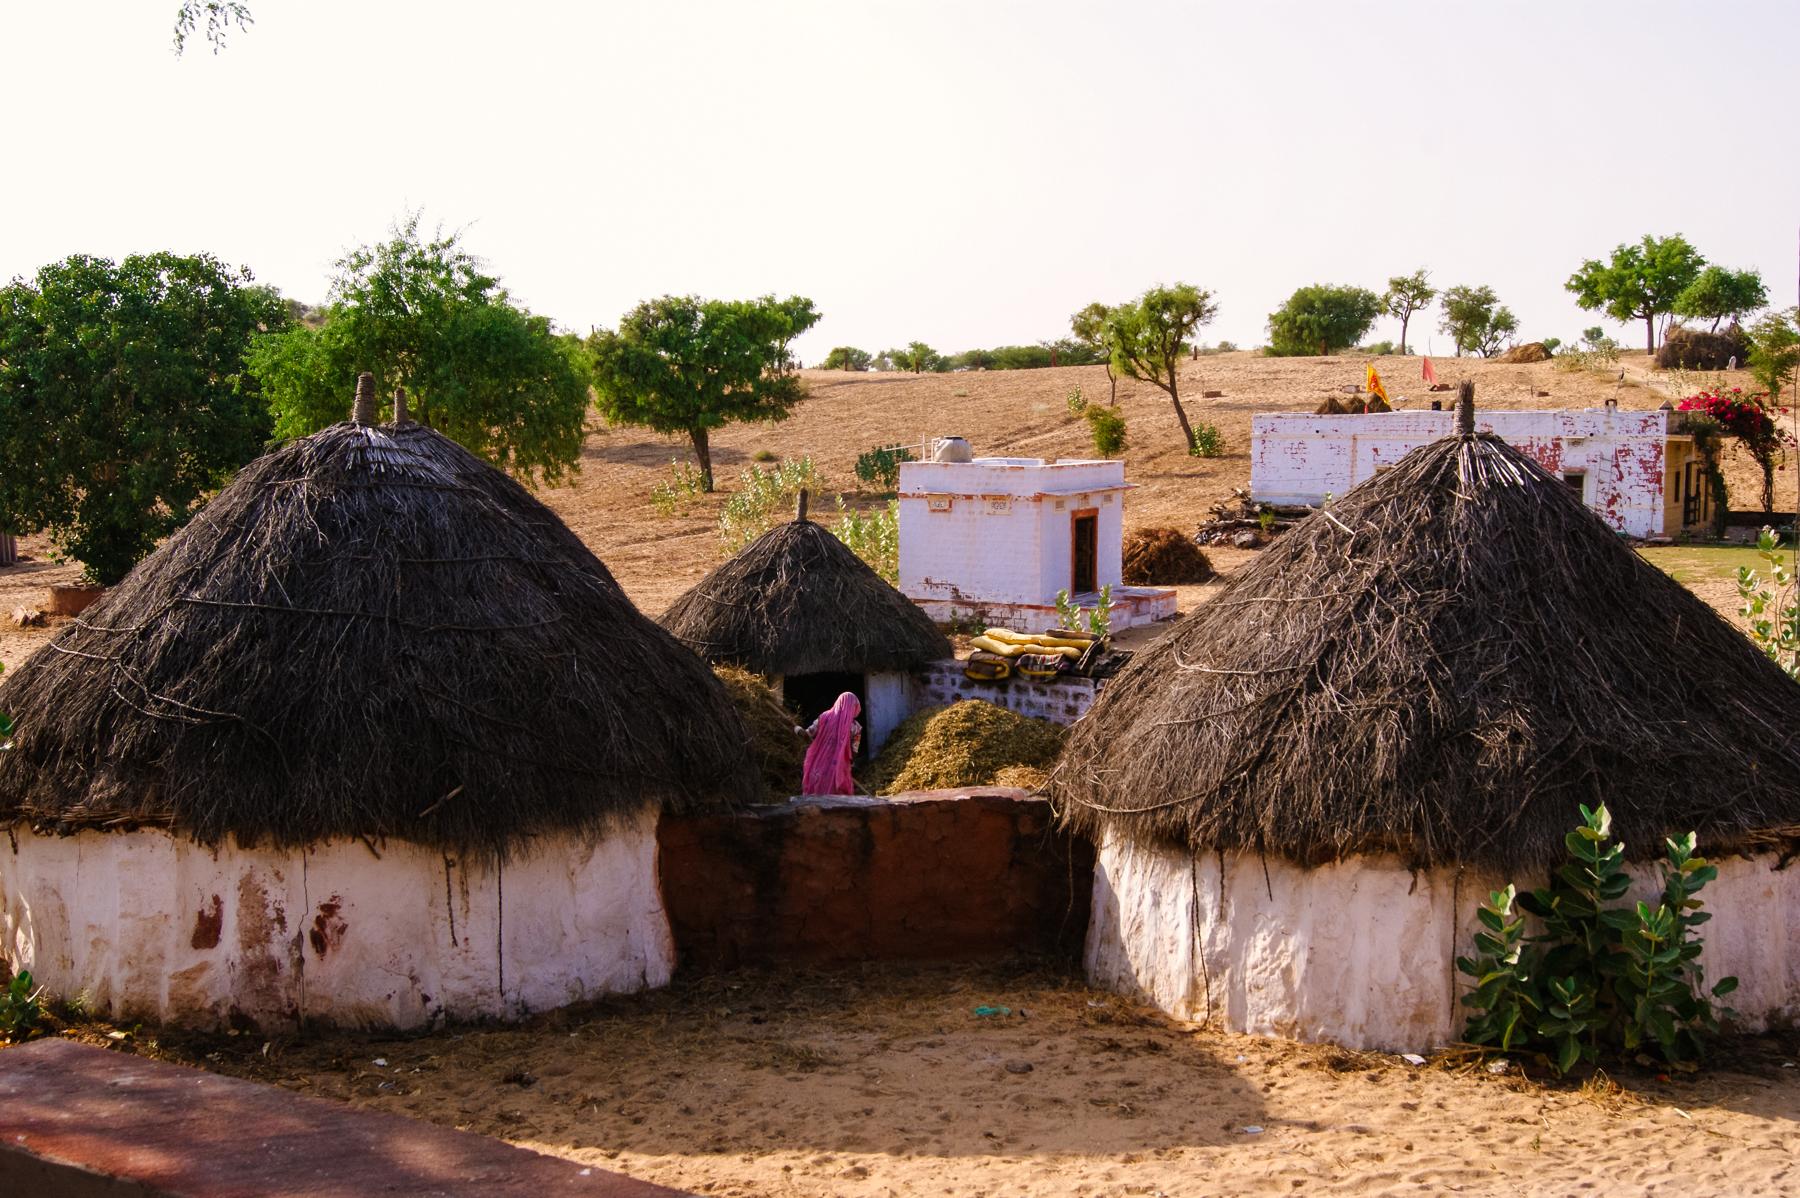 I went to the house of an Indian family in the middle of the desert